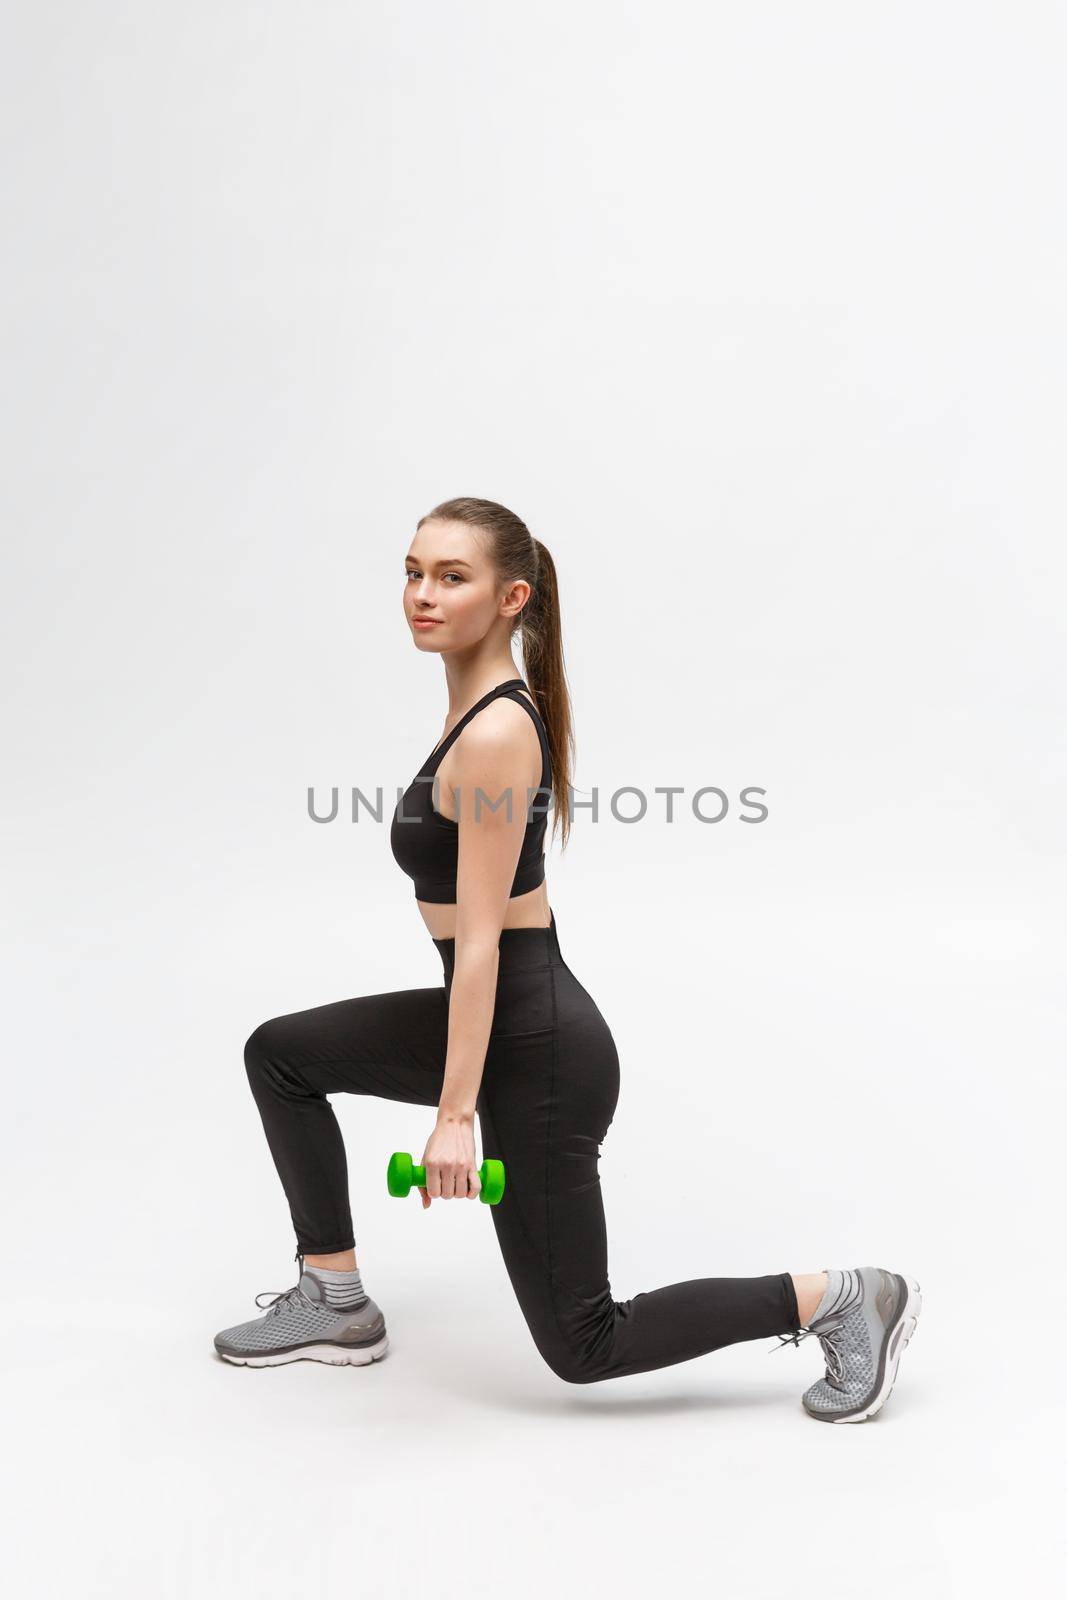 Exercise. Sports Woman In Fashion Sportswear Stretching Legs.